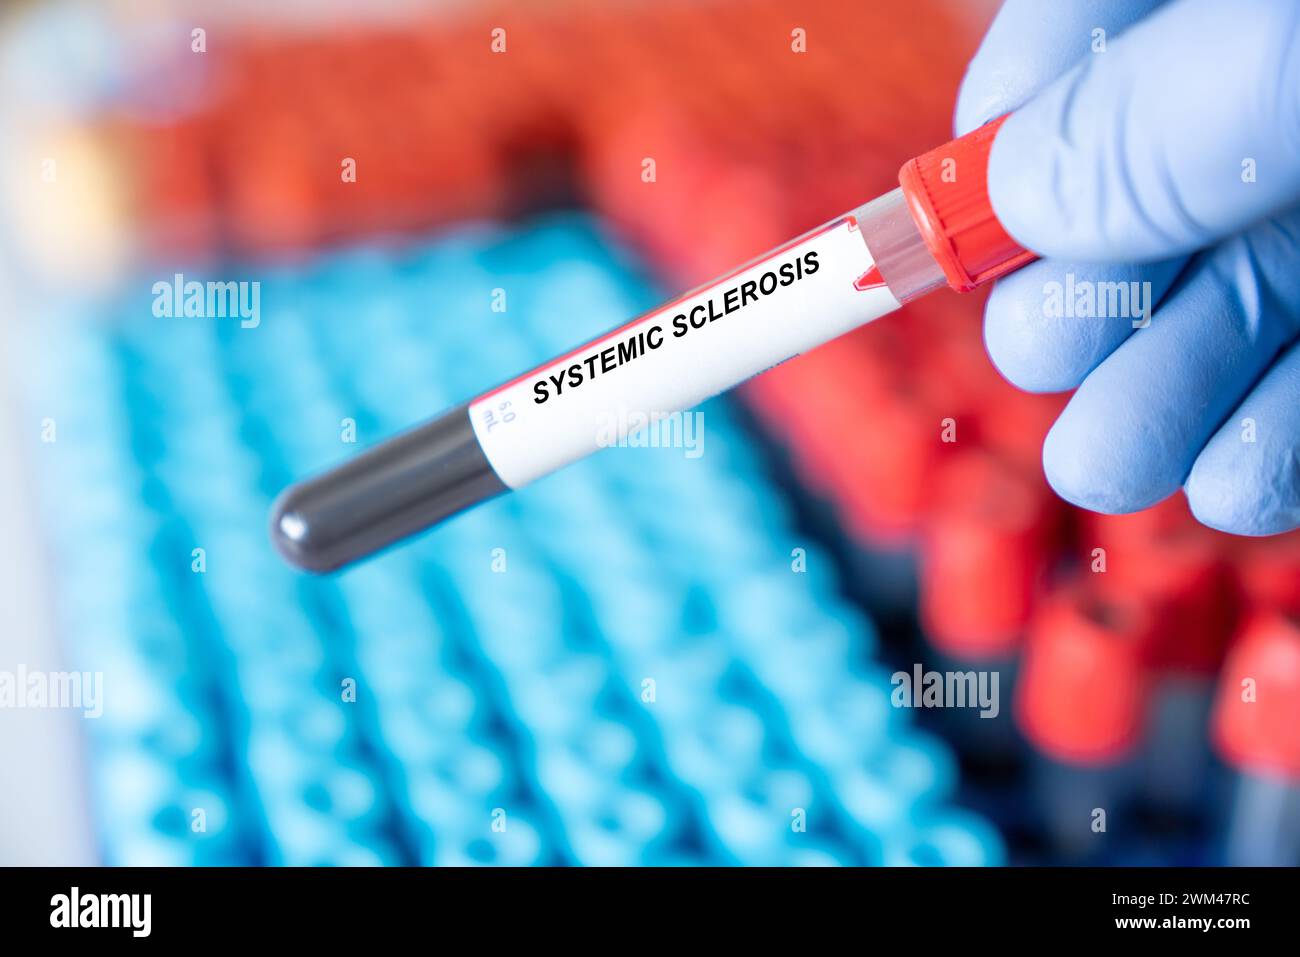 Systemic sclerosis blood test Stock Photo